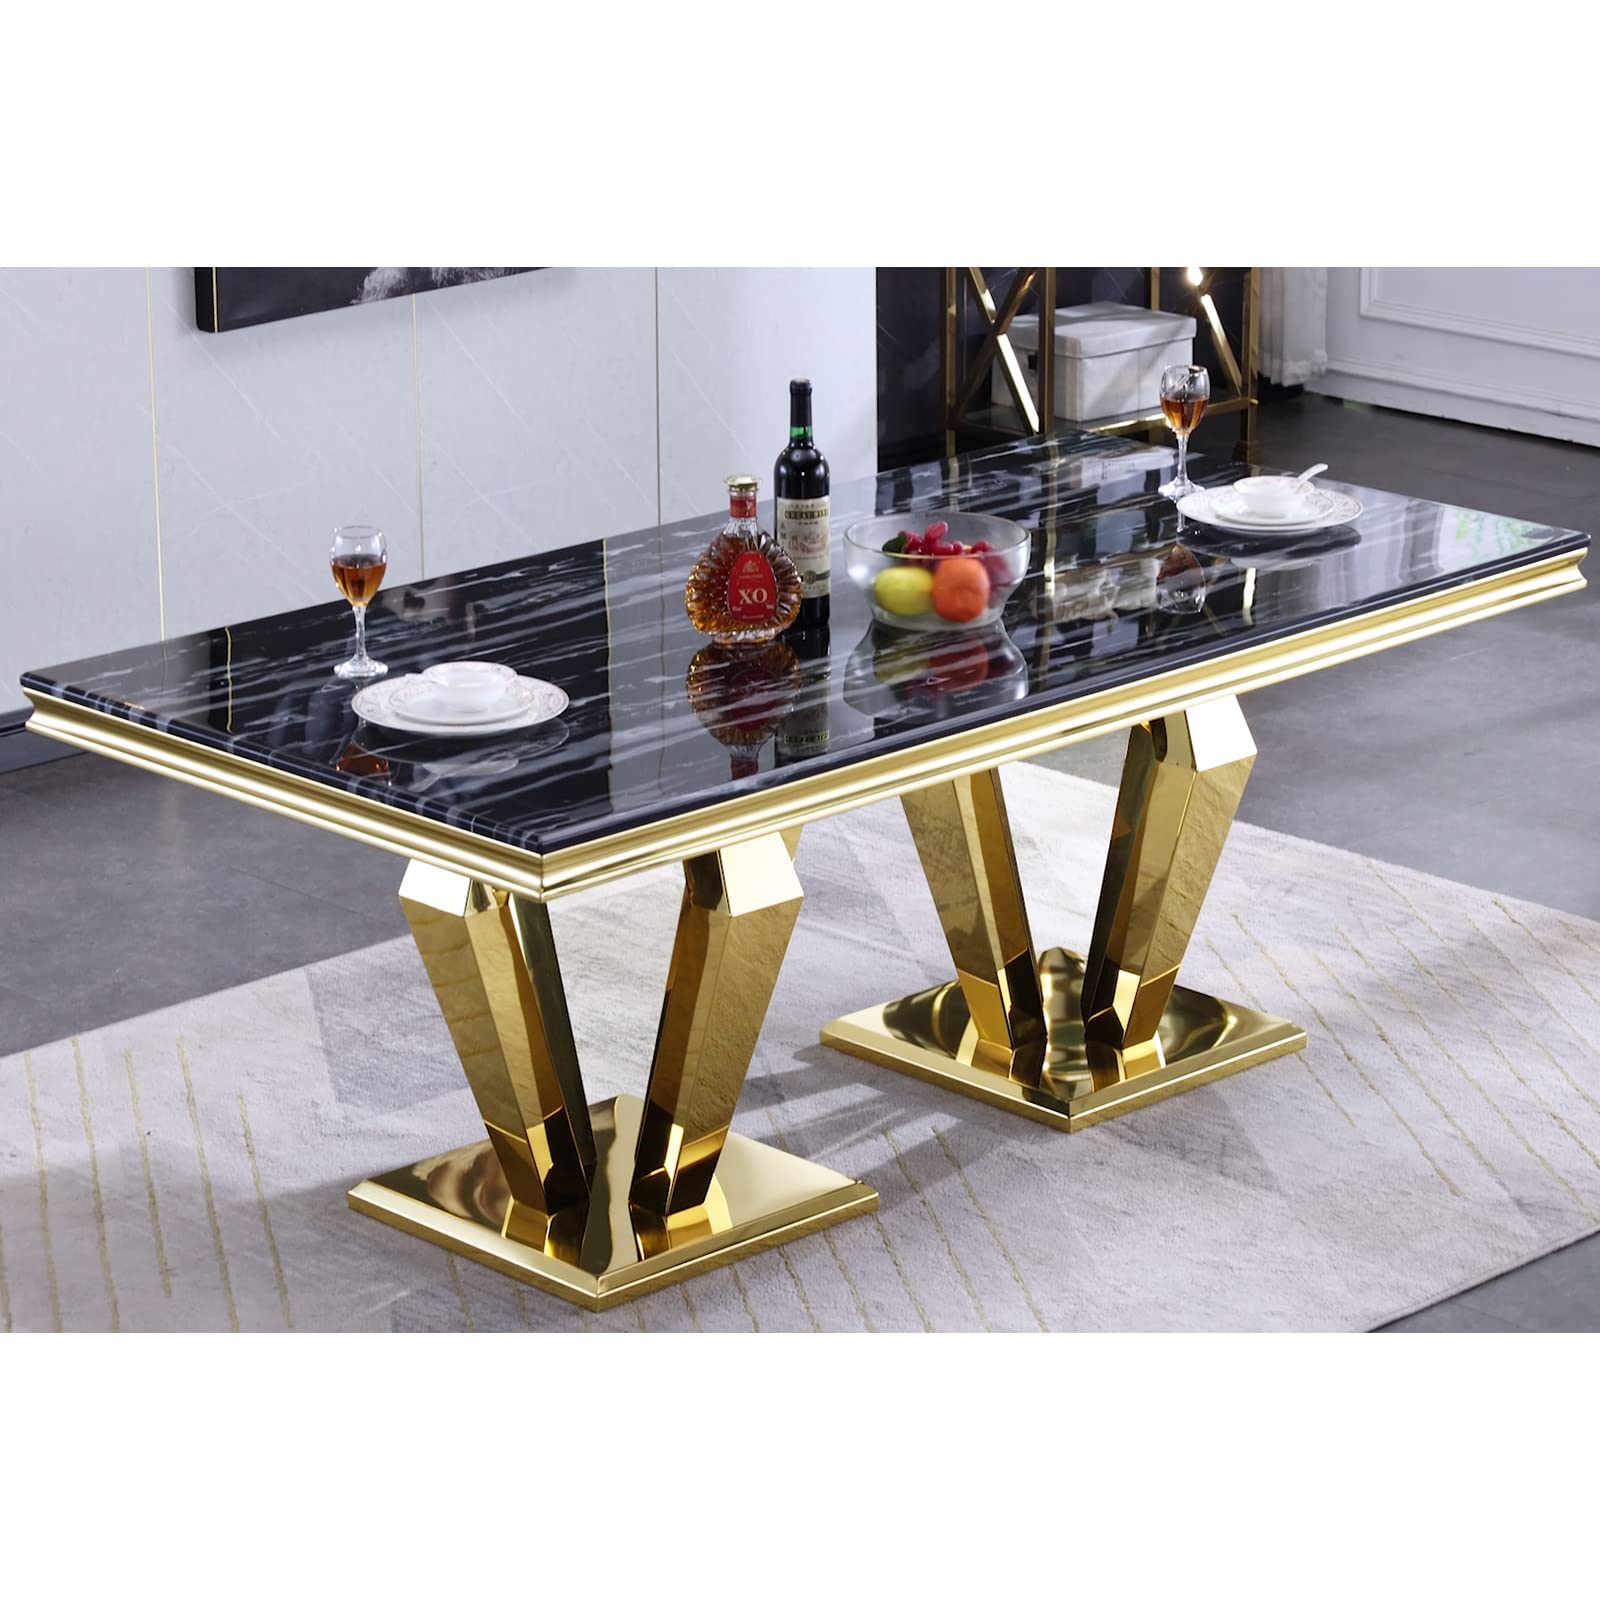 The Opulence of the Black and Gold Dining Table: Elevating Dining to Luxurious Heights